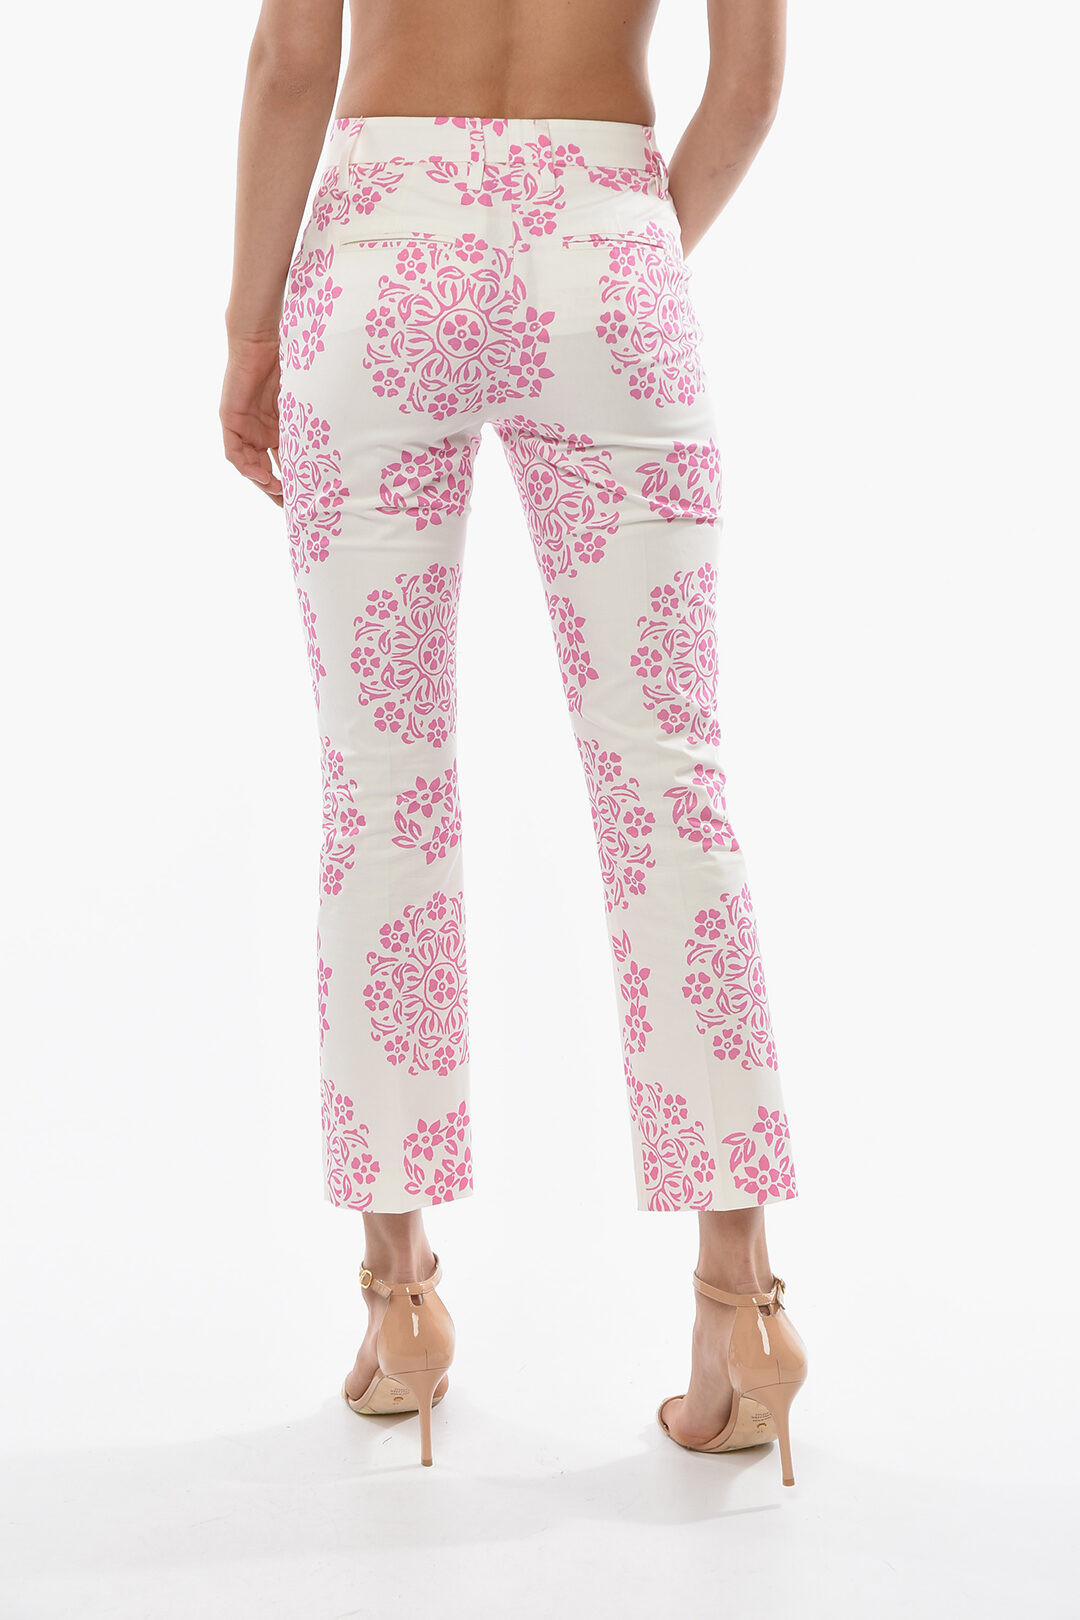 Off-White Floral Palazzo Pants women - Glamood Outlet